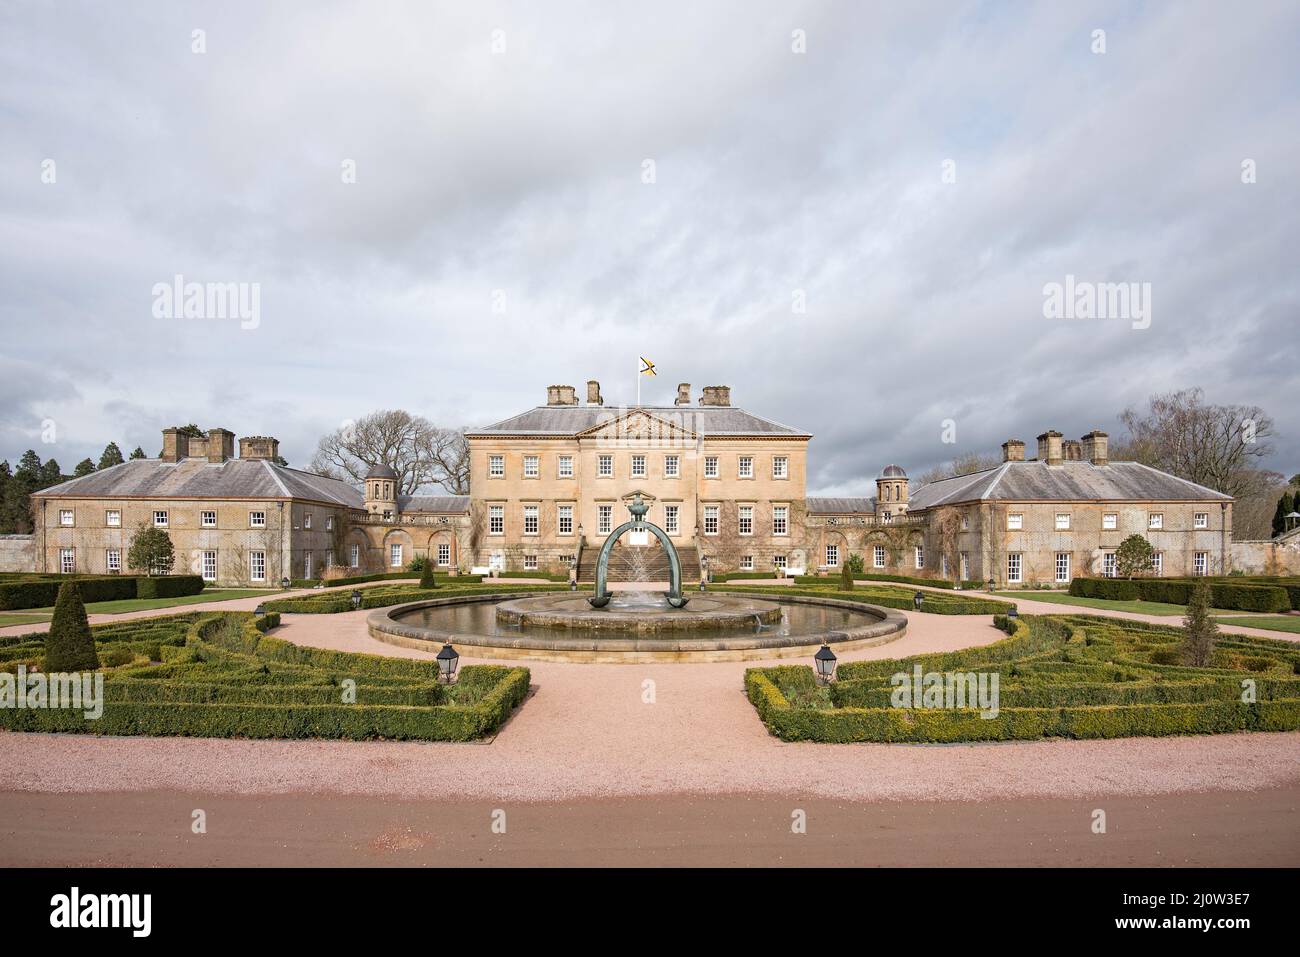 Dumfries House, Palladian country house in Ayrshire 2 miles west of Cumnock owned by The Princes Foundation & a Scottish visitor attraction. Stock Photo